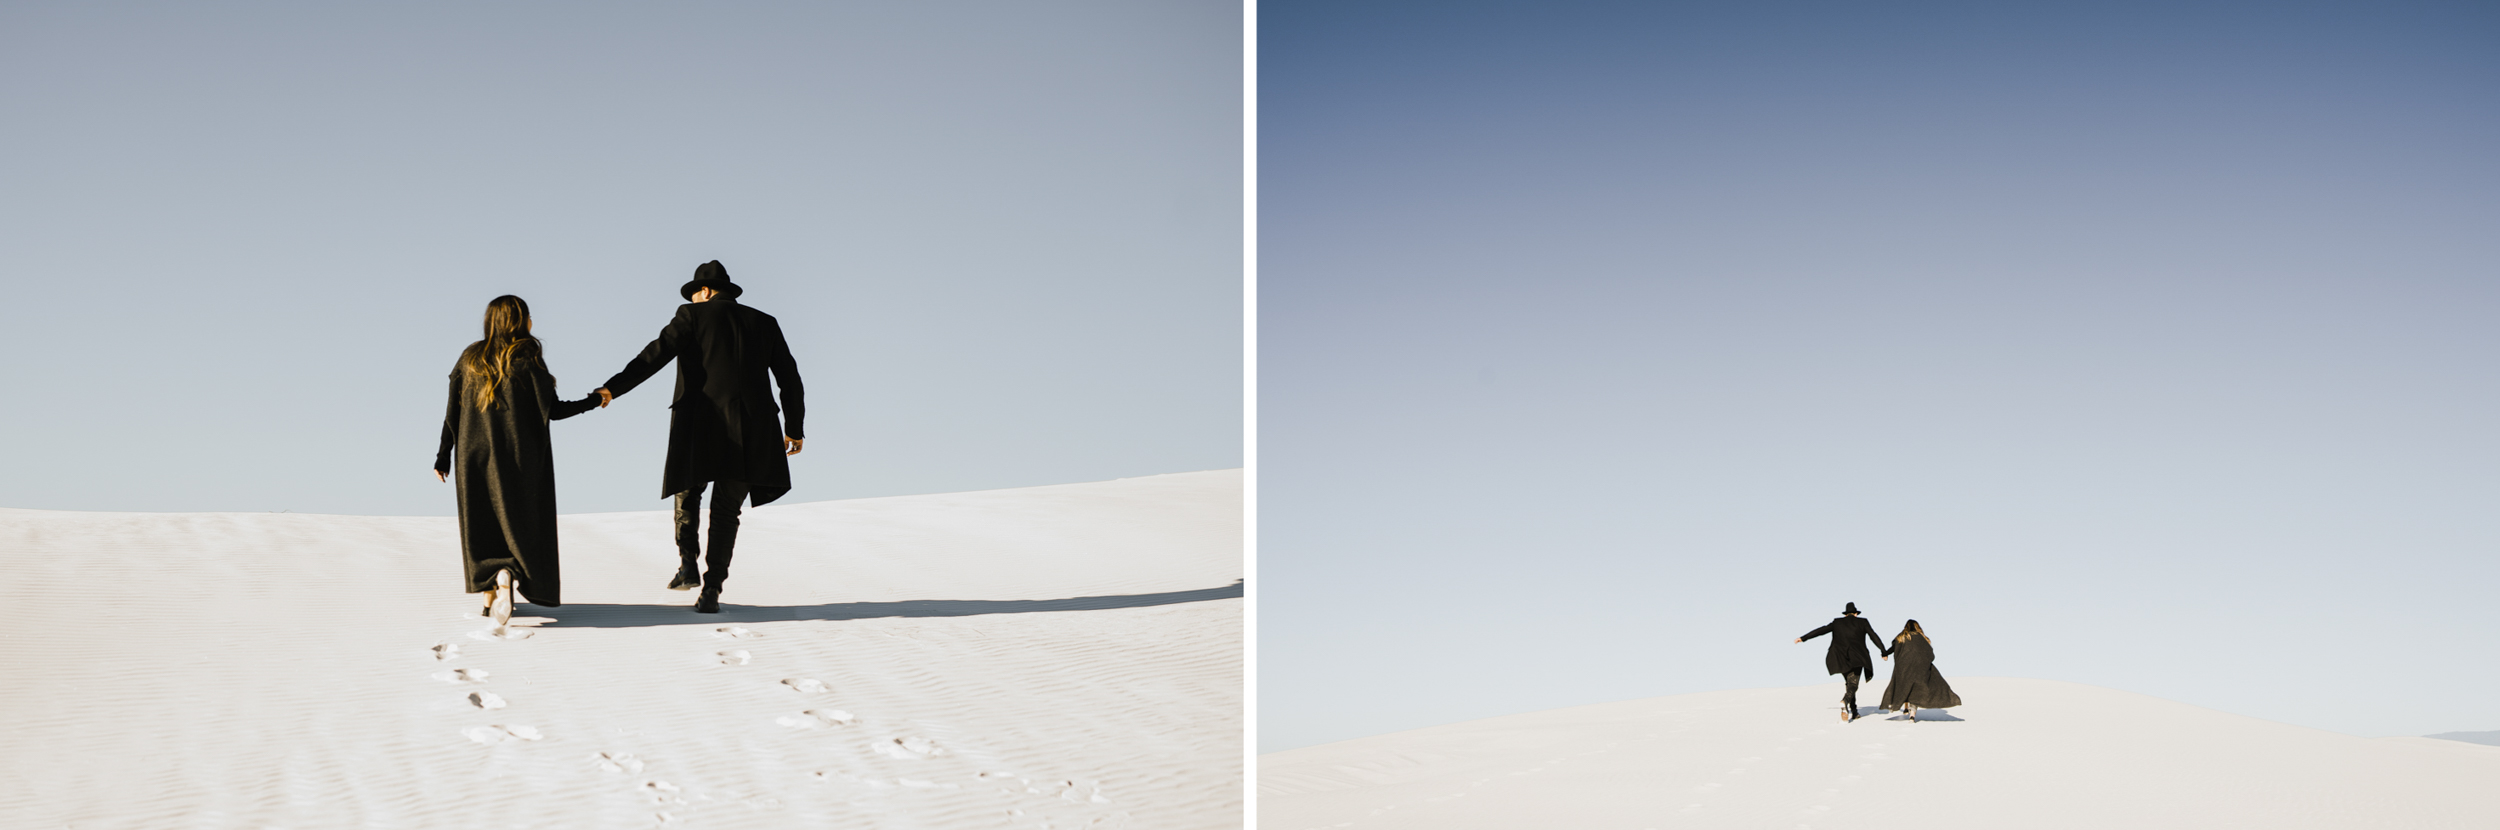 ©Isaiah & Taylor Photography - White Sands Natioanl Monument, New Mexico Engagement-027.jpg